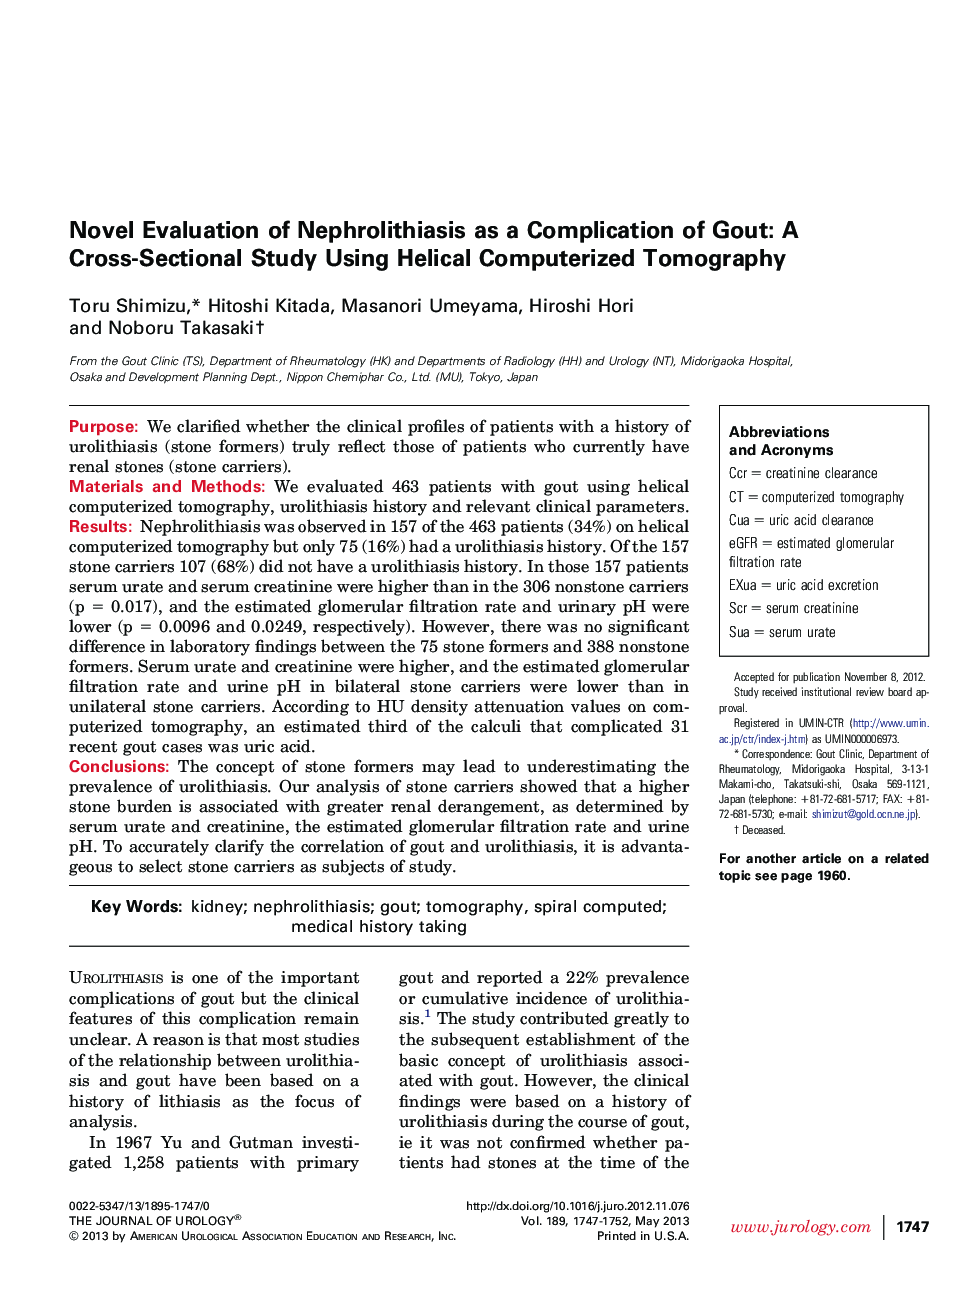 Novel Evaluation of Nephrolithiasis as a Complication of Gout: A Cross-Sectional Study Using Helical Computerized Tomography 